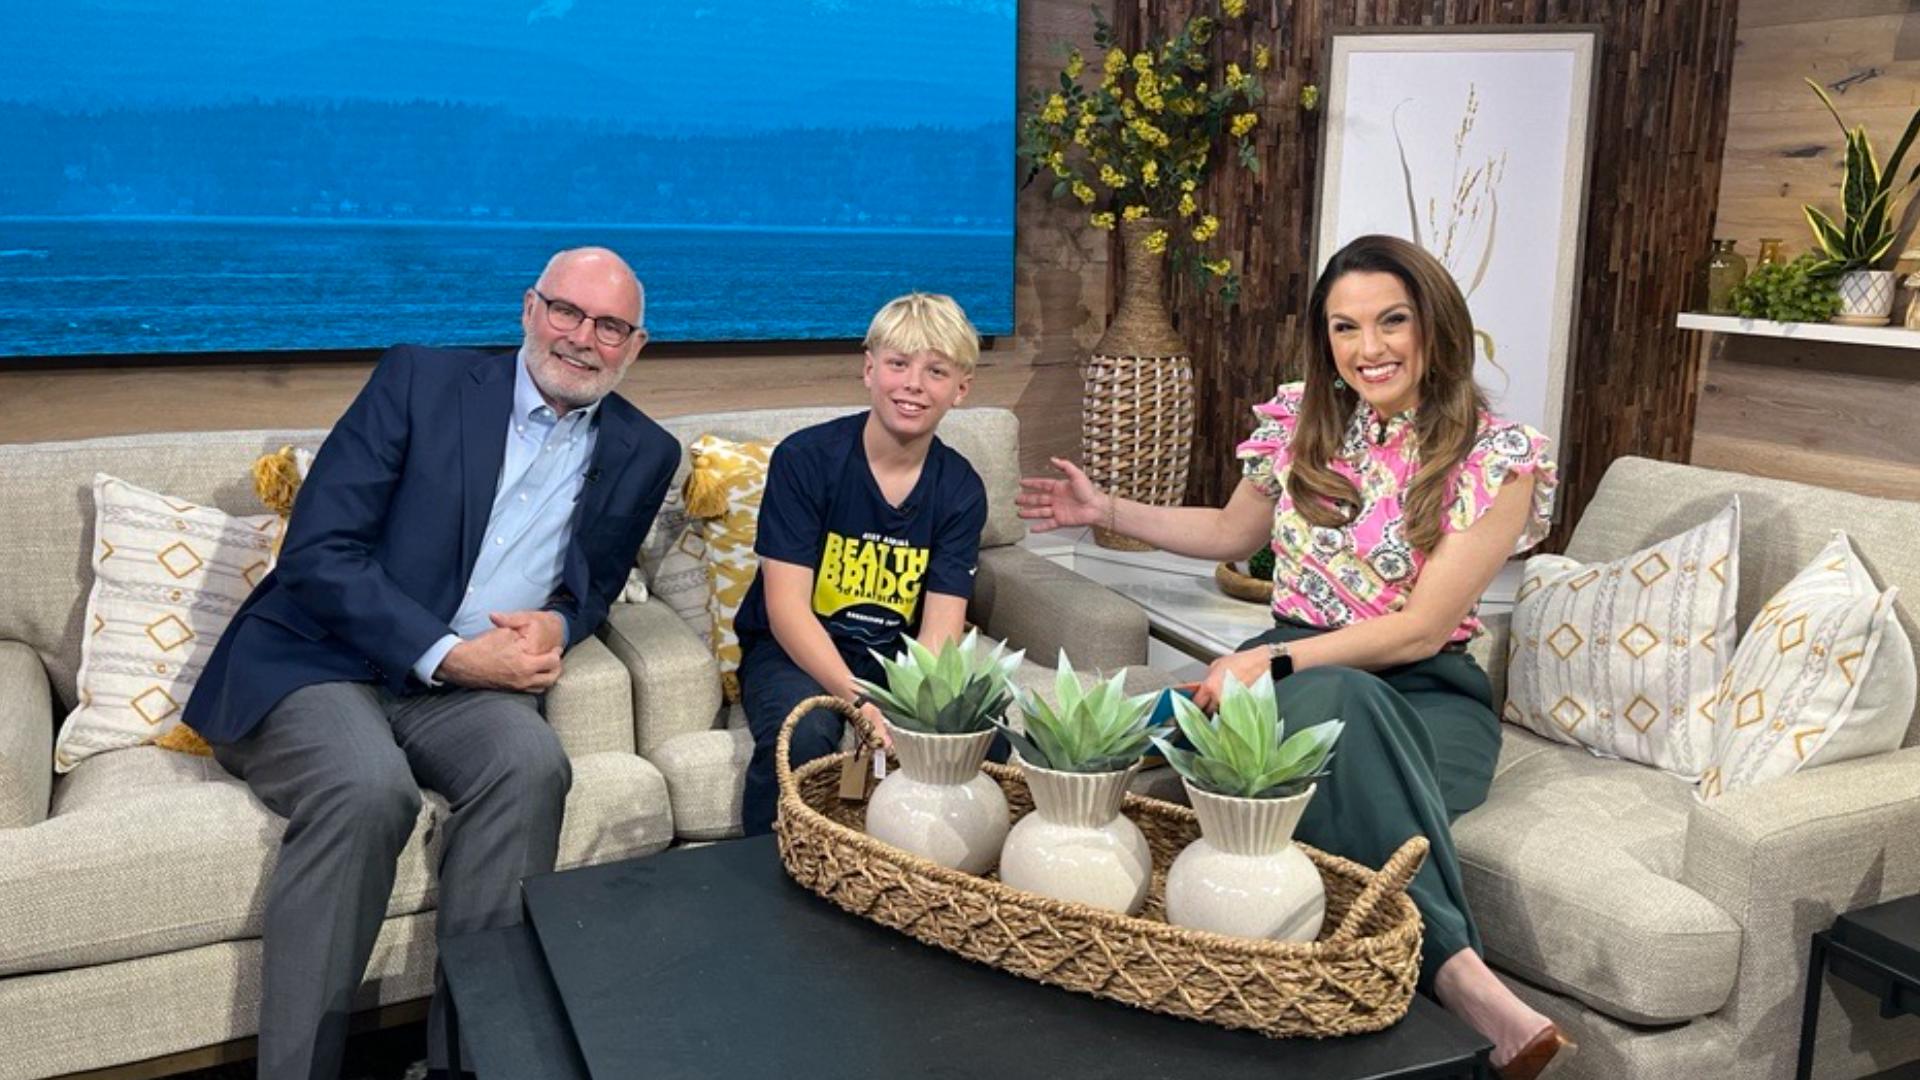 Beat the Bridge Chair Mike Boyle and Ambassador Roman talk about the annual fundraiser for the Juvenile Diabetes Foundation. The race is on May 19. #newdaynw